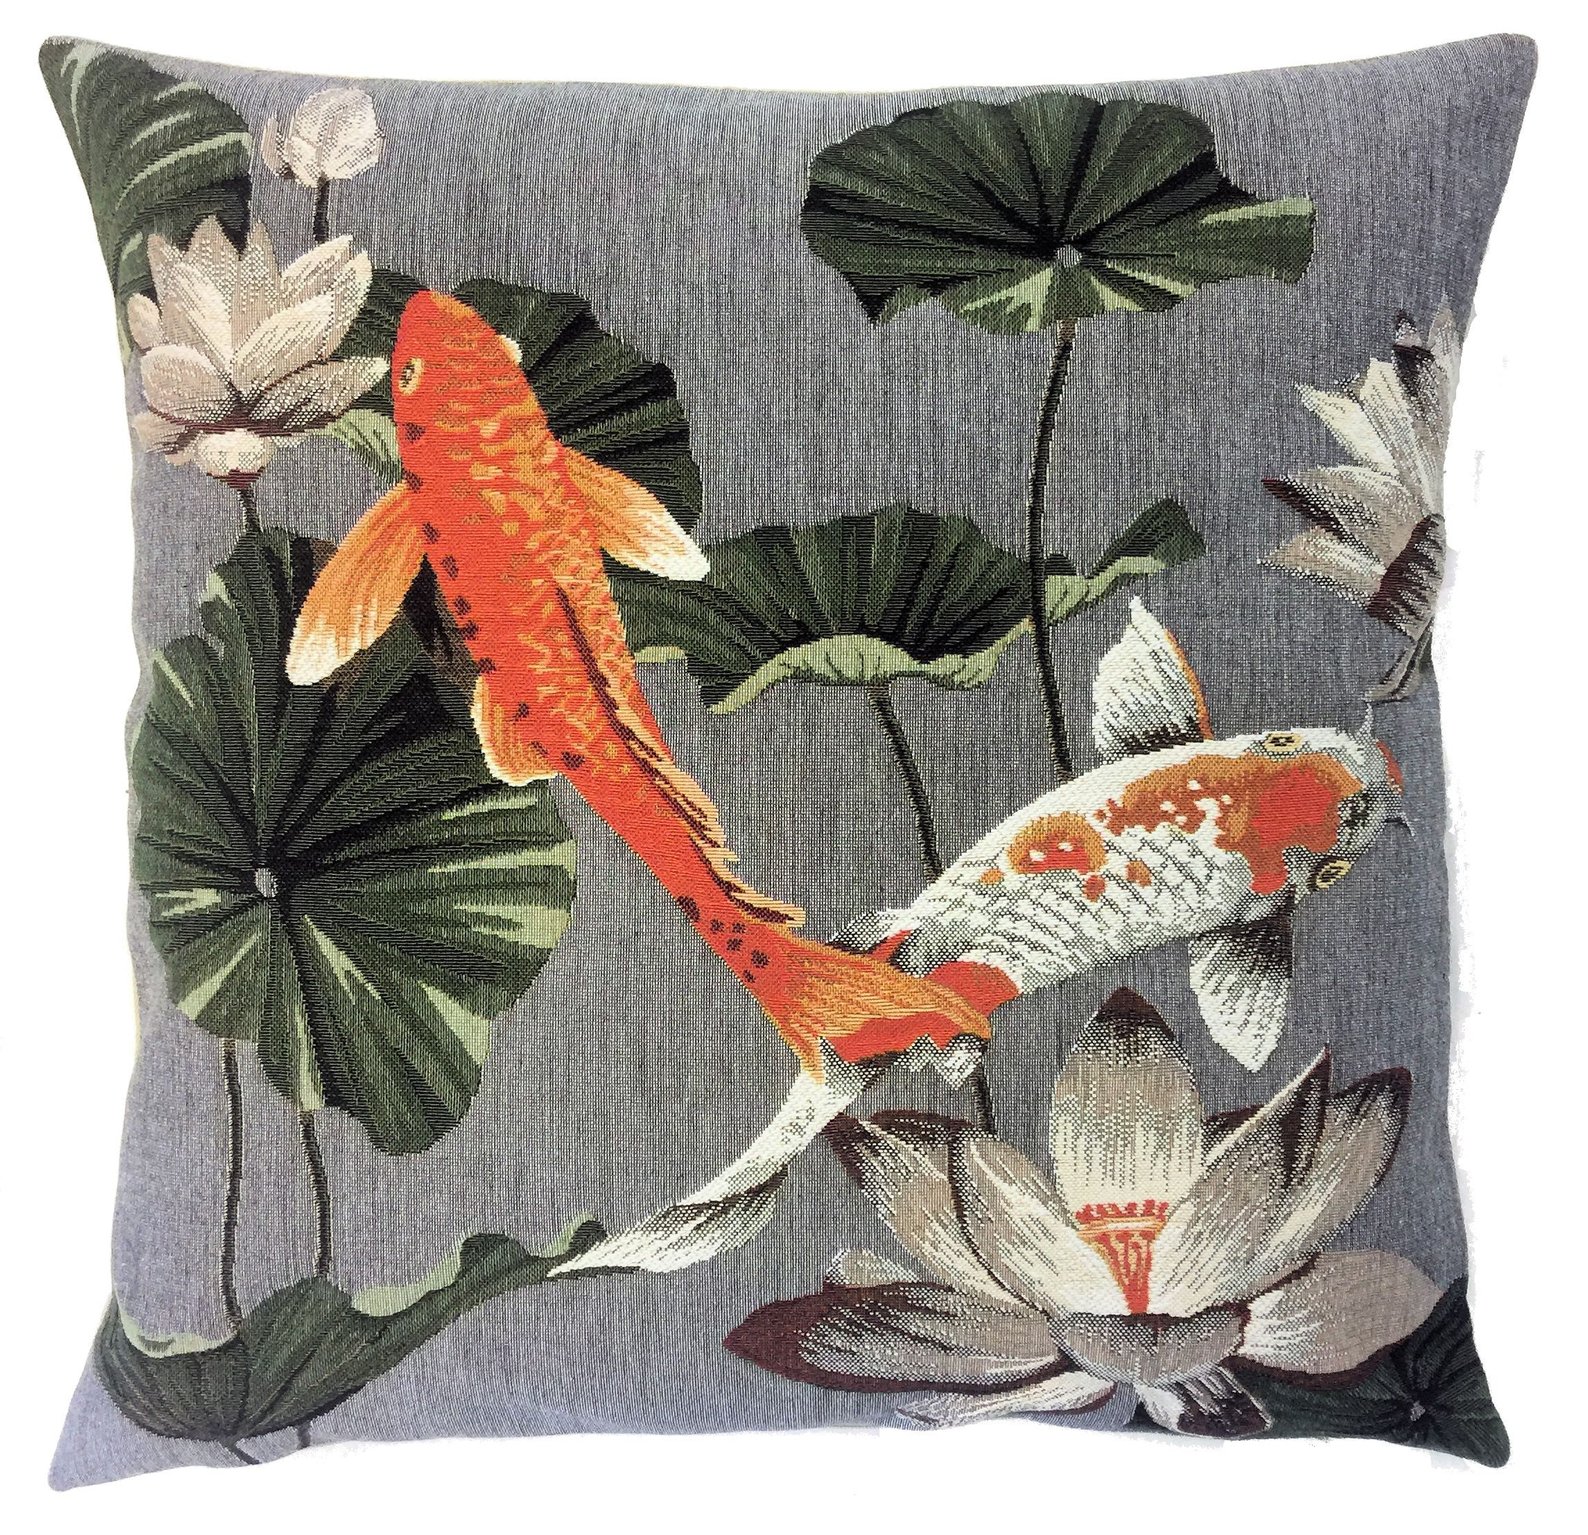 KOI FISH DECOR Belgian Tapestry Throw Pillow Cases - Decorative 18 X 18  Square Pillow Covers - Zippered Throw Pillow Case - Jacquard Woven Belgium  Tapestry Cushion Covers - Fun Japanese Fish